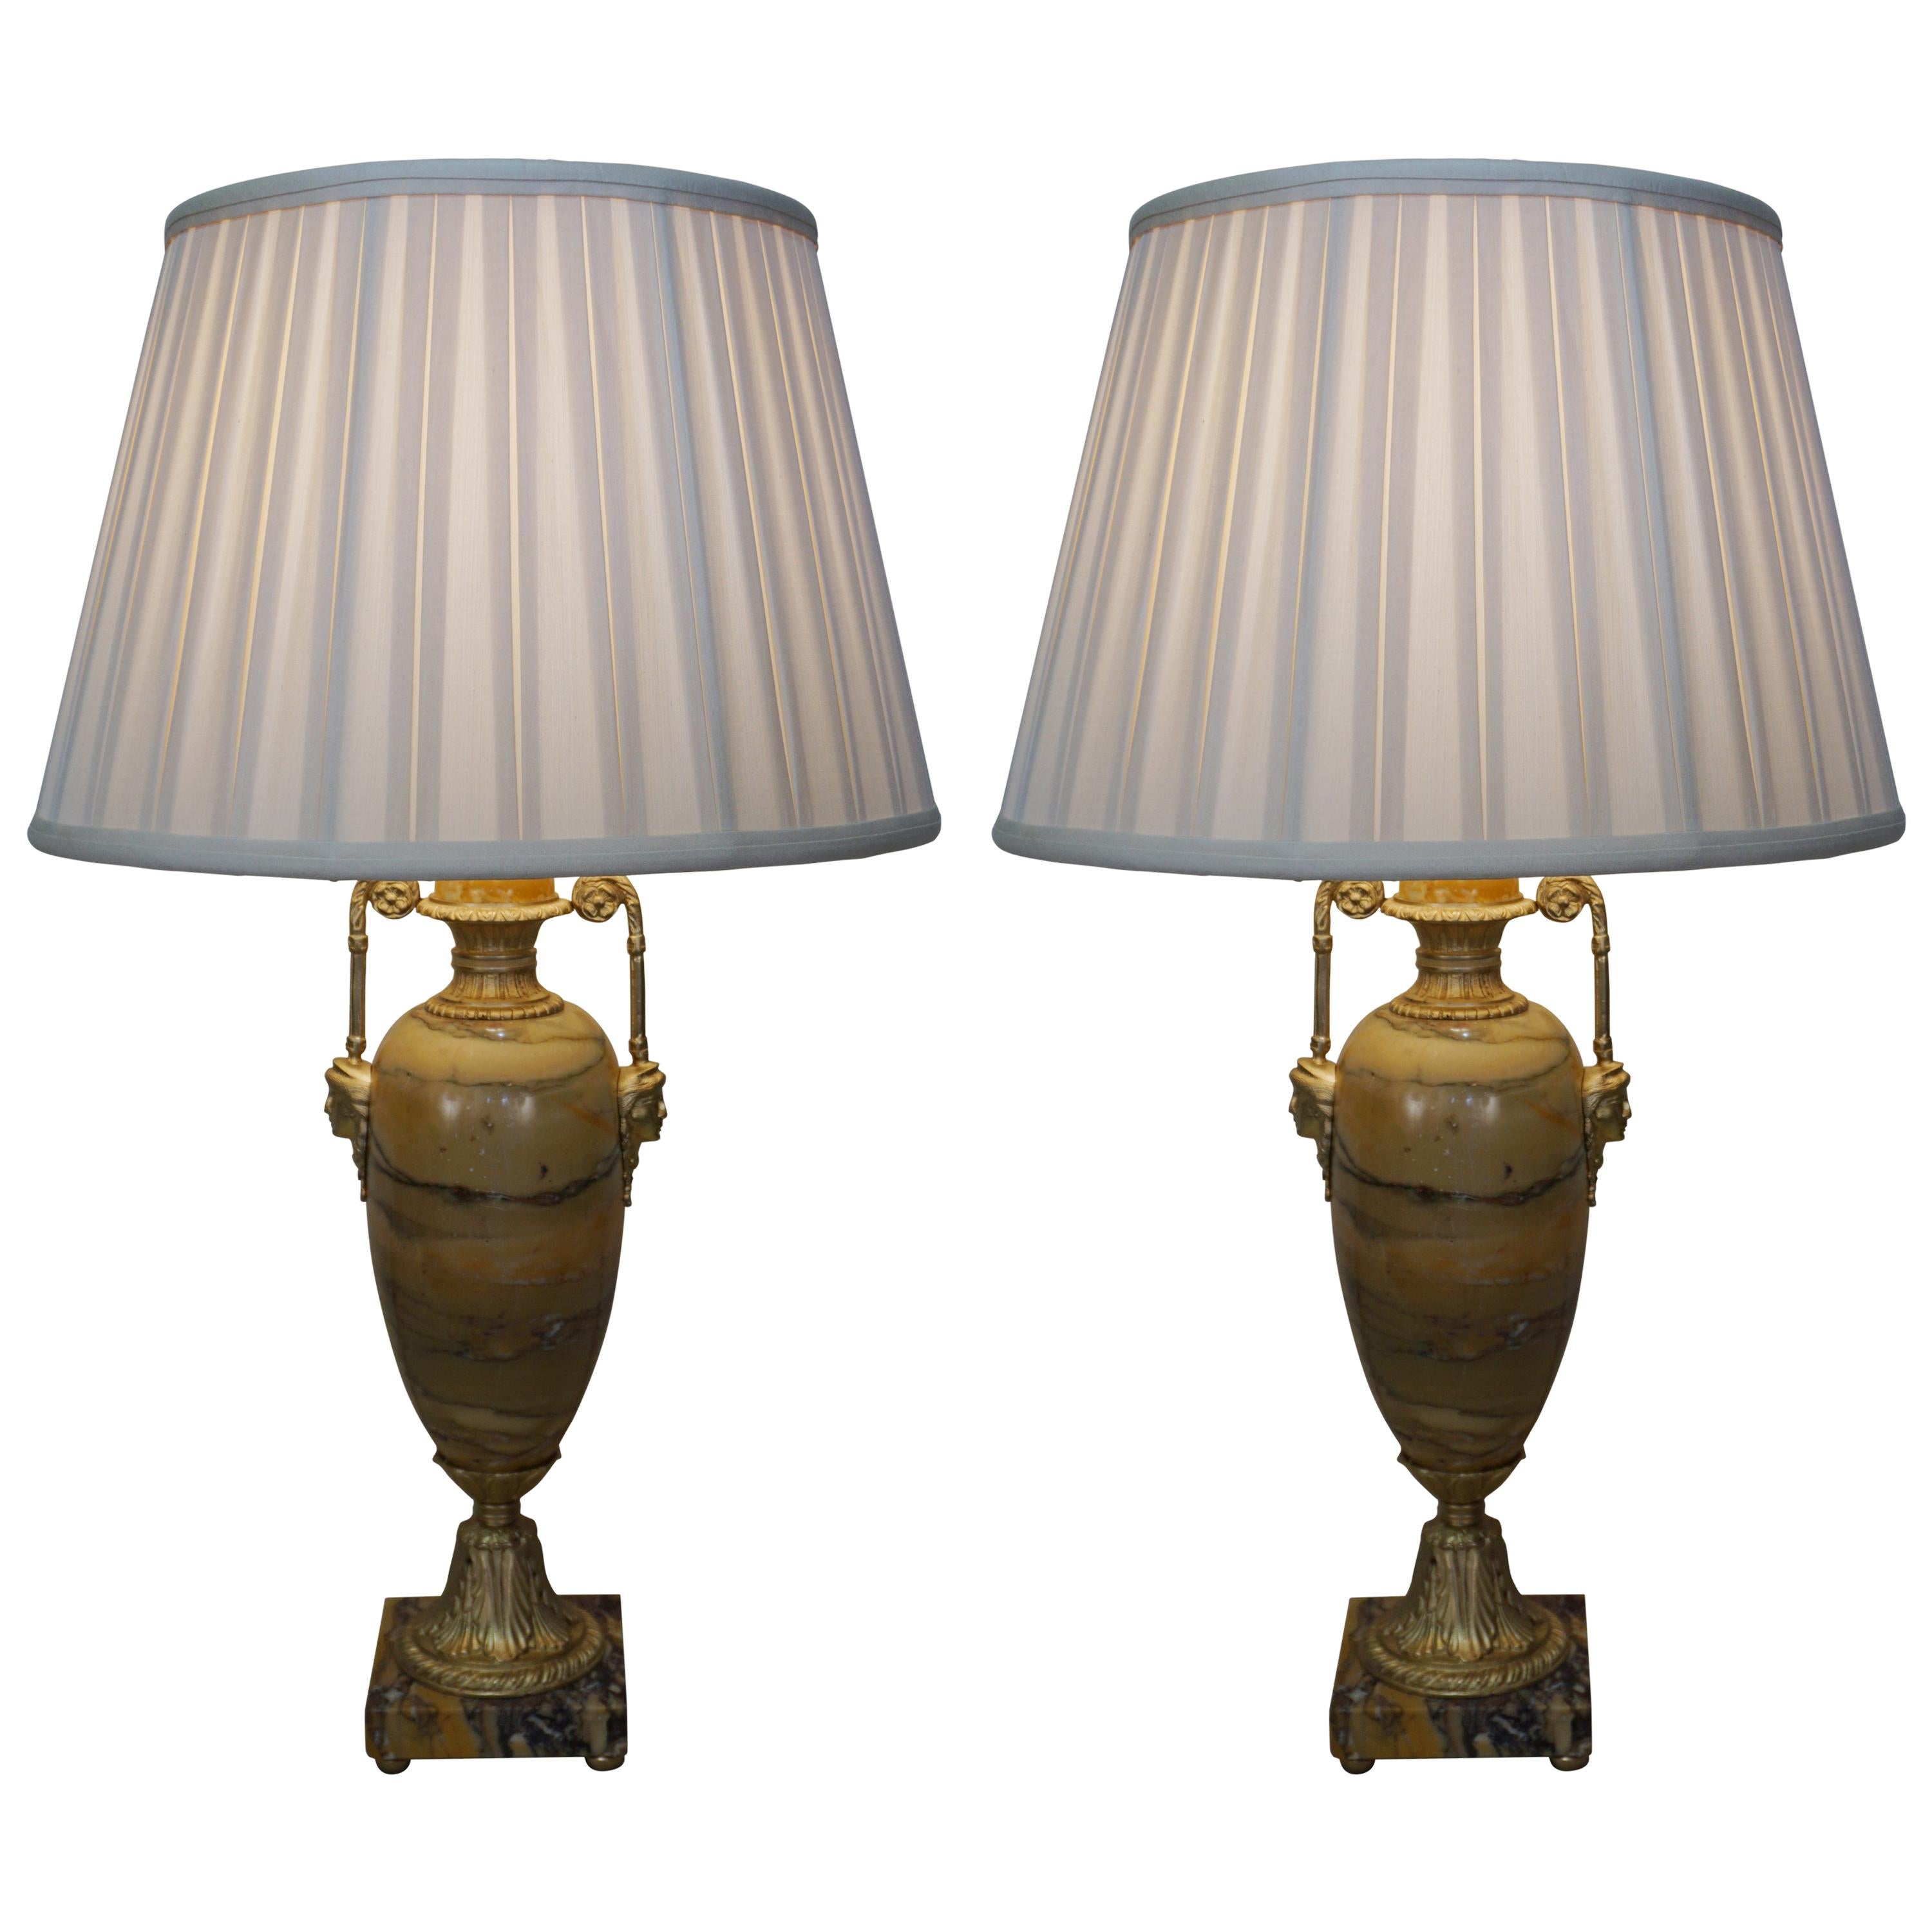 Pair of 19th Century Marble and Bronze Table Lamps